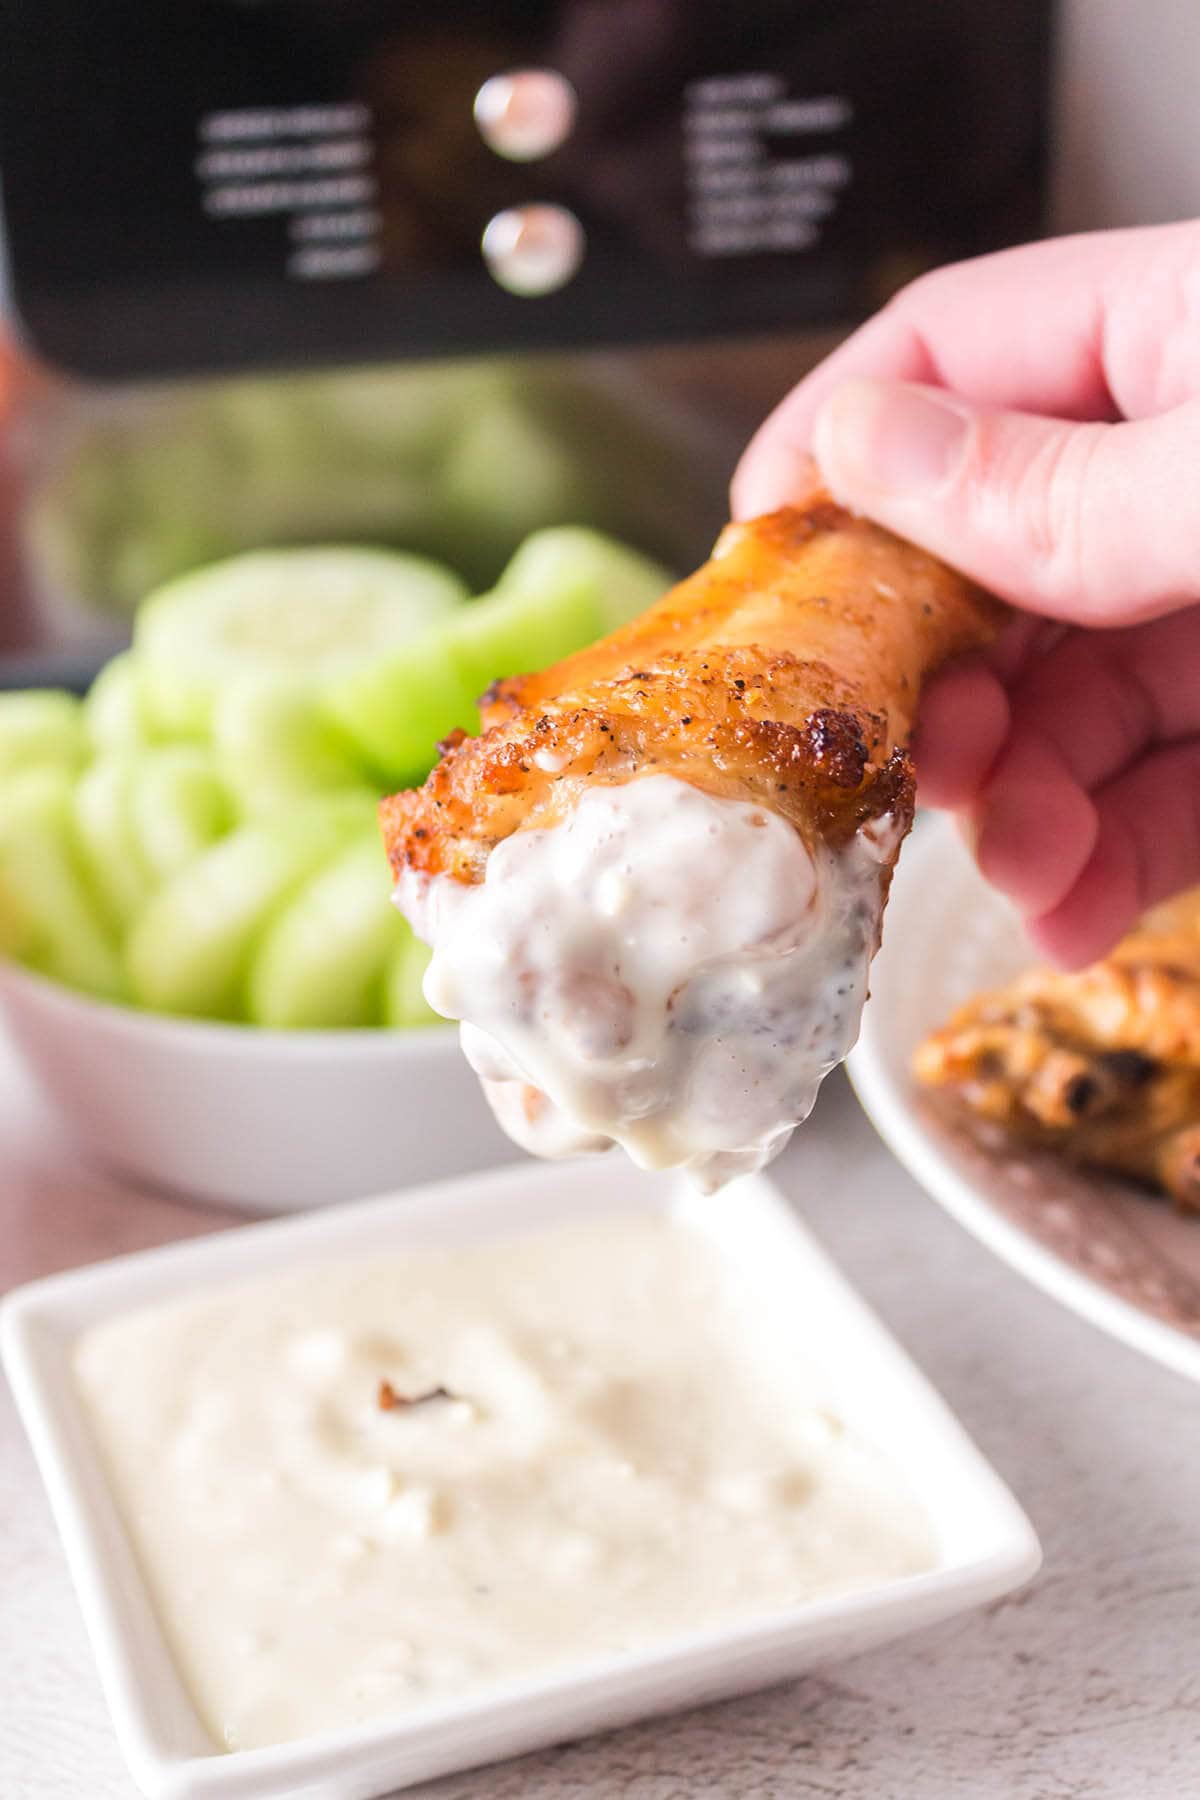 Chicken wing dipped in blue cheese dressing.